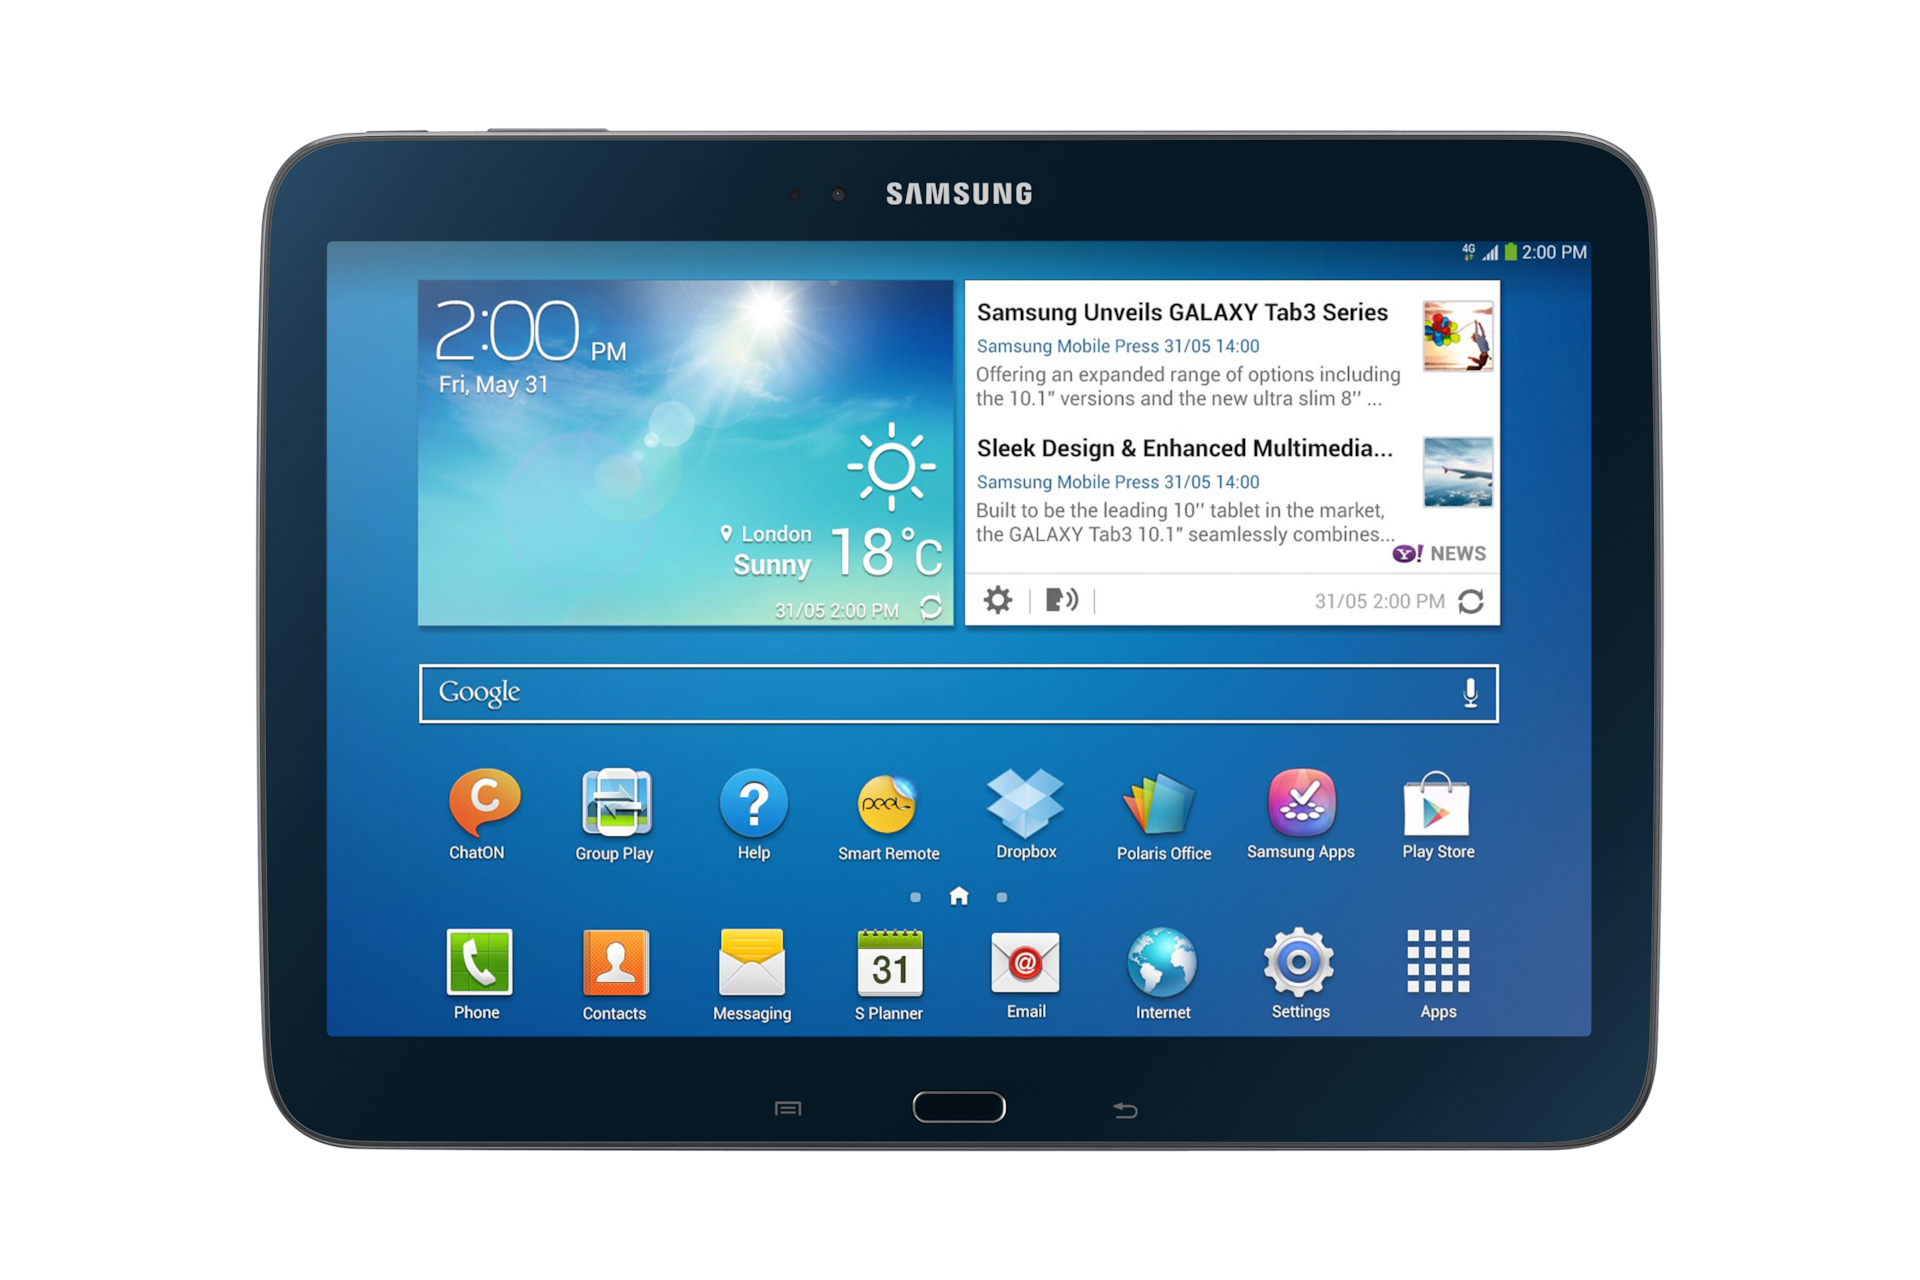 How to Update Galaxy Tab 3 10.1 (LTE) P5220 with Android 4.2.2 XXUANB4 Jelly Bean Official Firmware